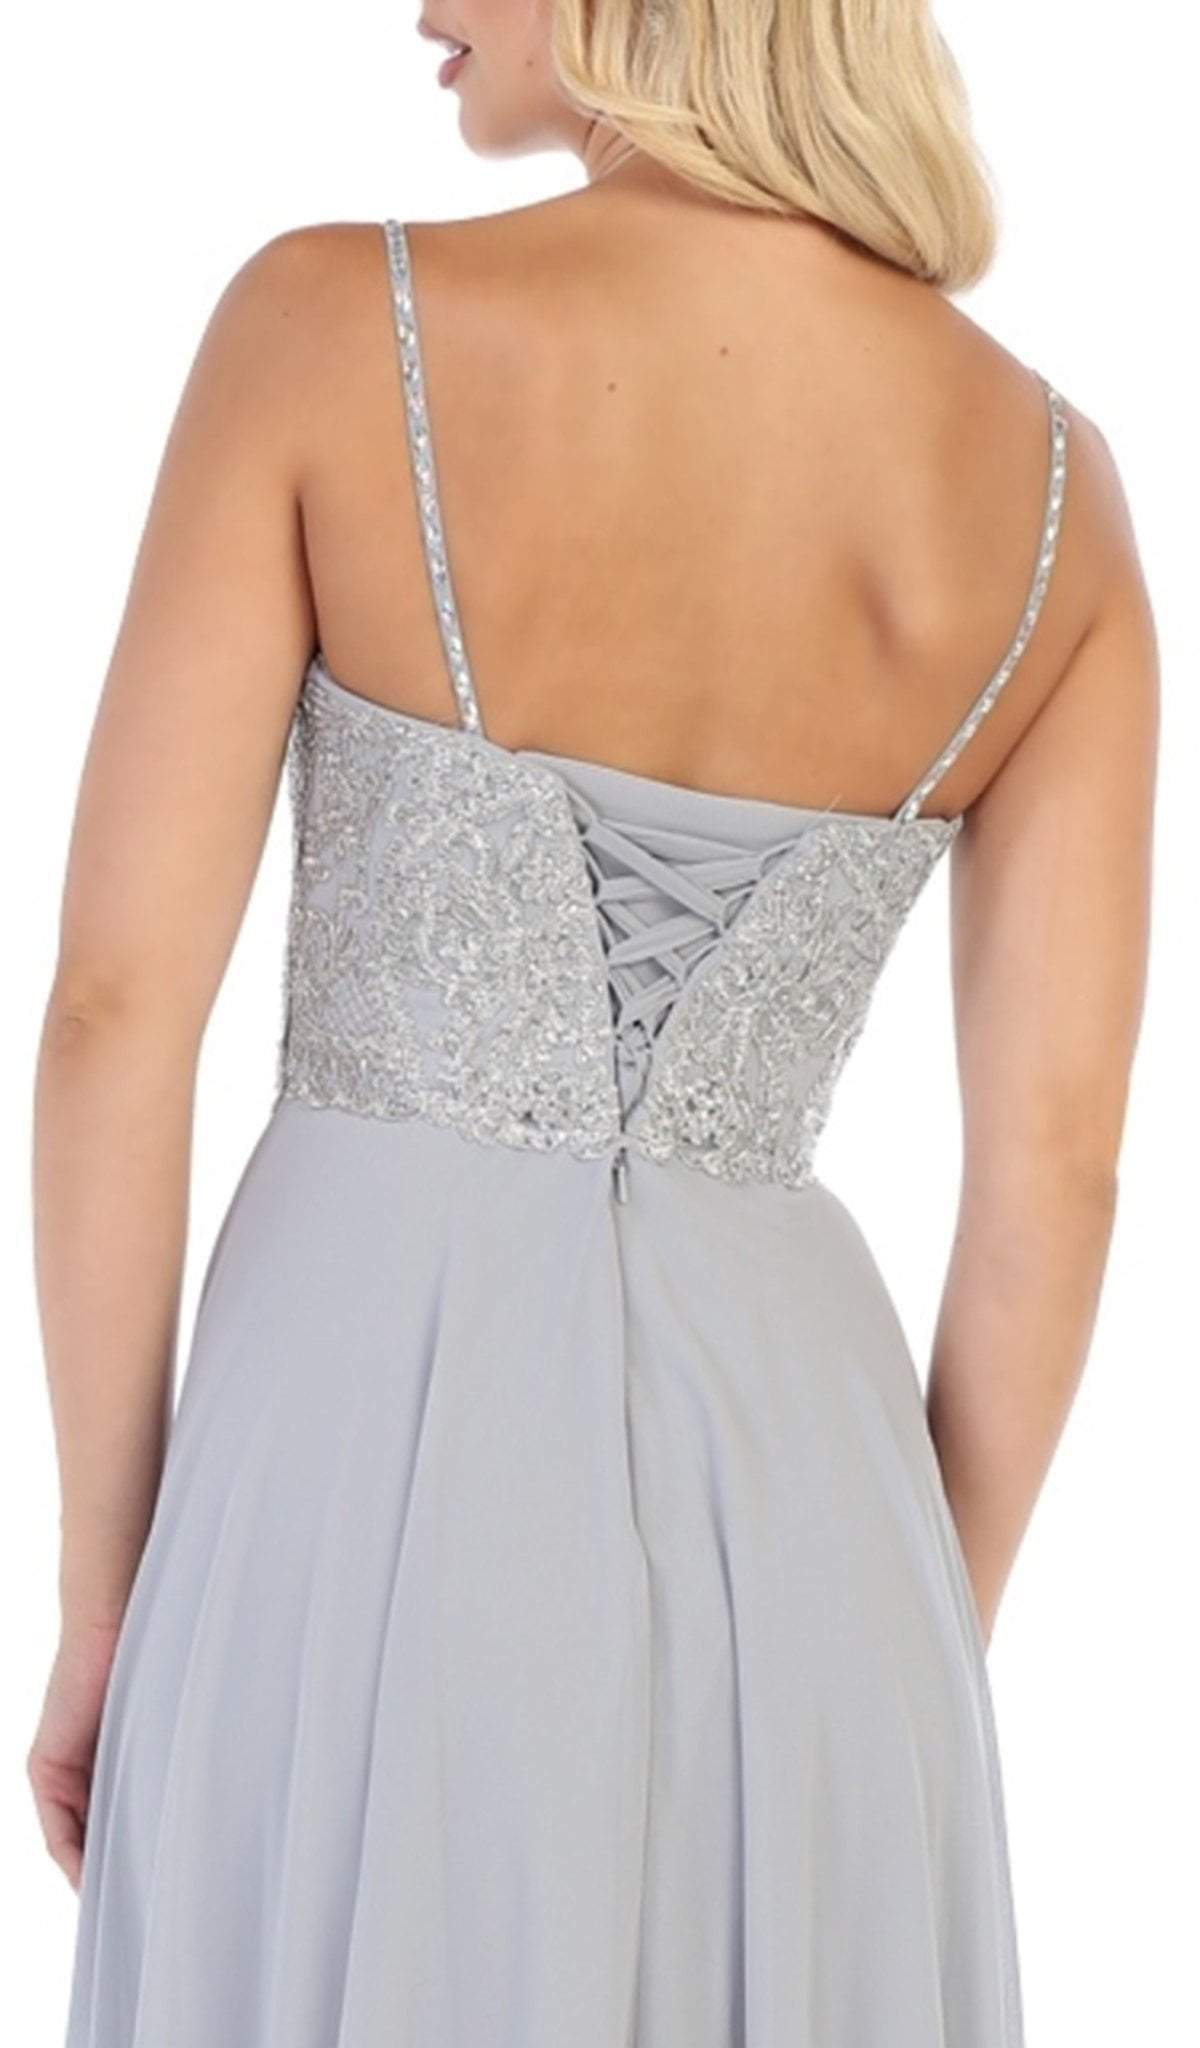 May Queen - MQ1588 Sequin Embellished A-Line Gown Bridesmaid Dresses